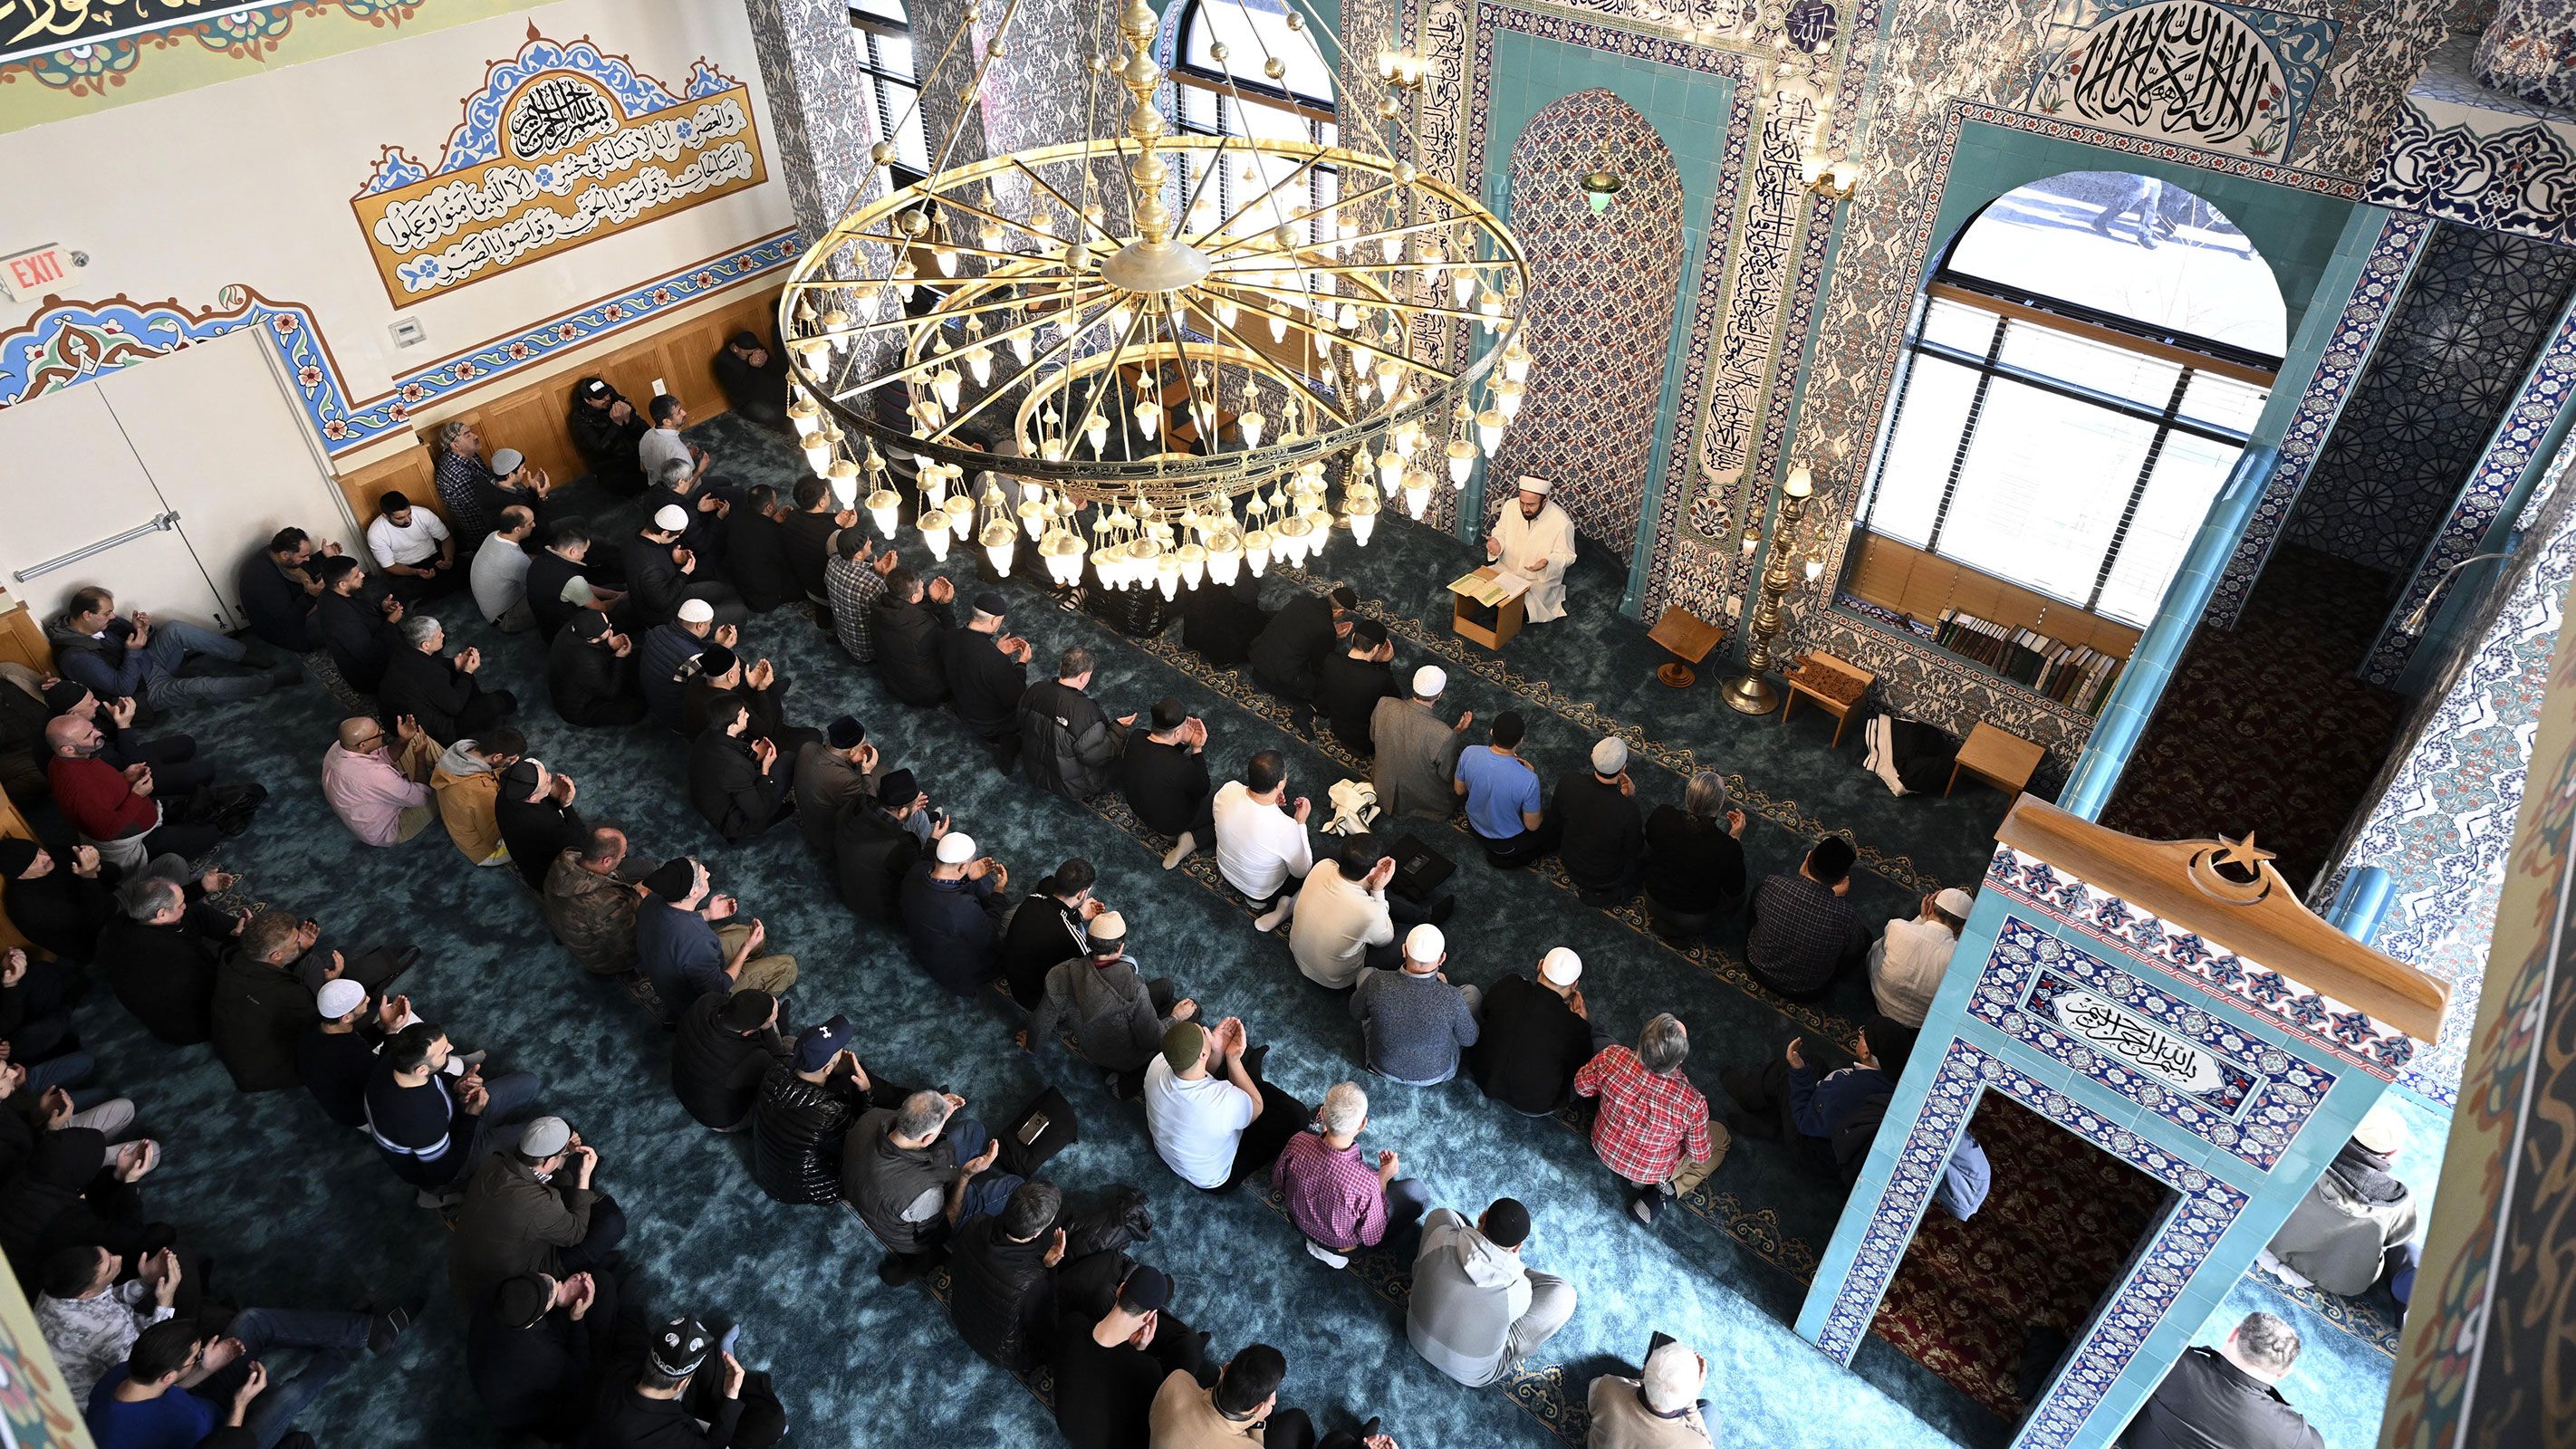 People gather during a Friday prayer at a Turkish mosque in Brooklyn, New York City.